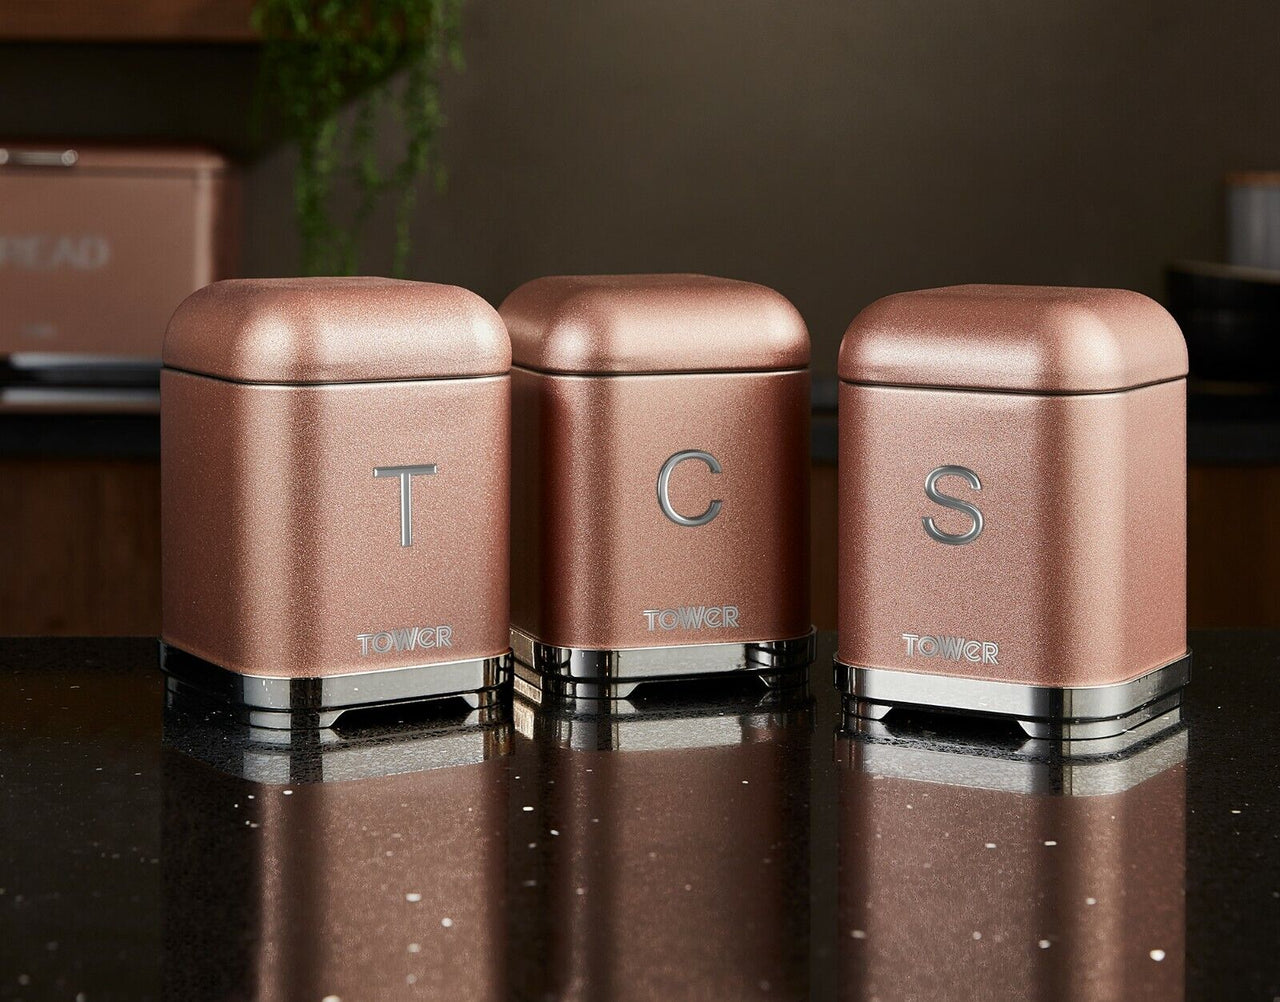 Tower Glitz Pink Set of 3 Kitchen Storage Canisters in Blush Pink